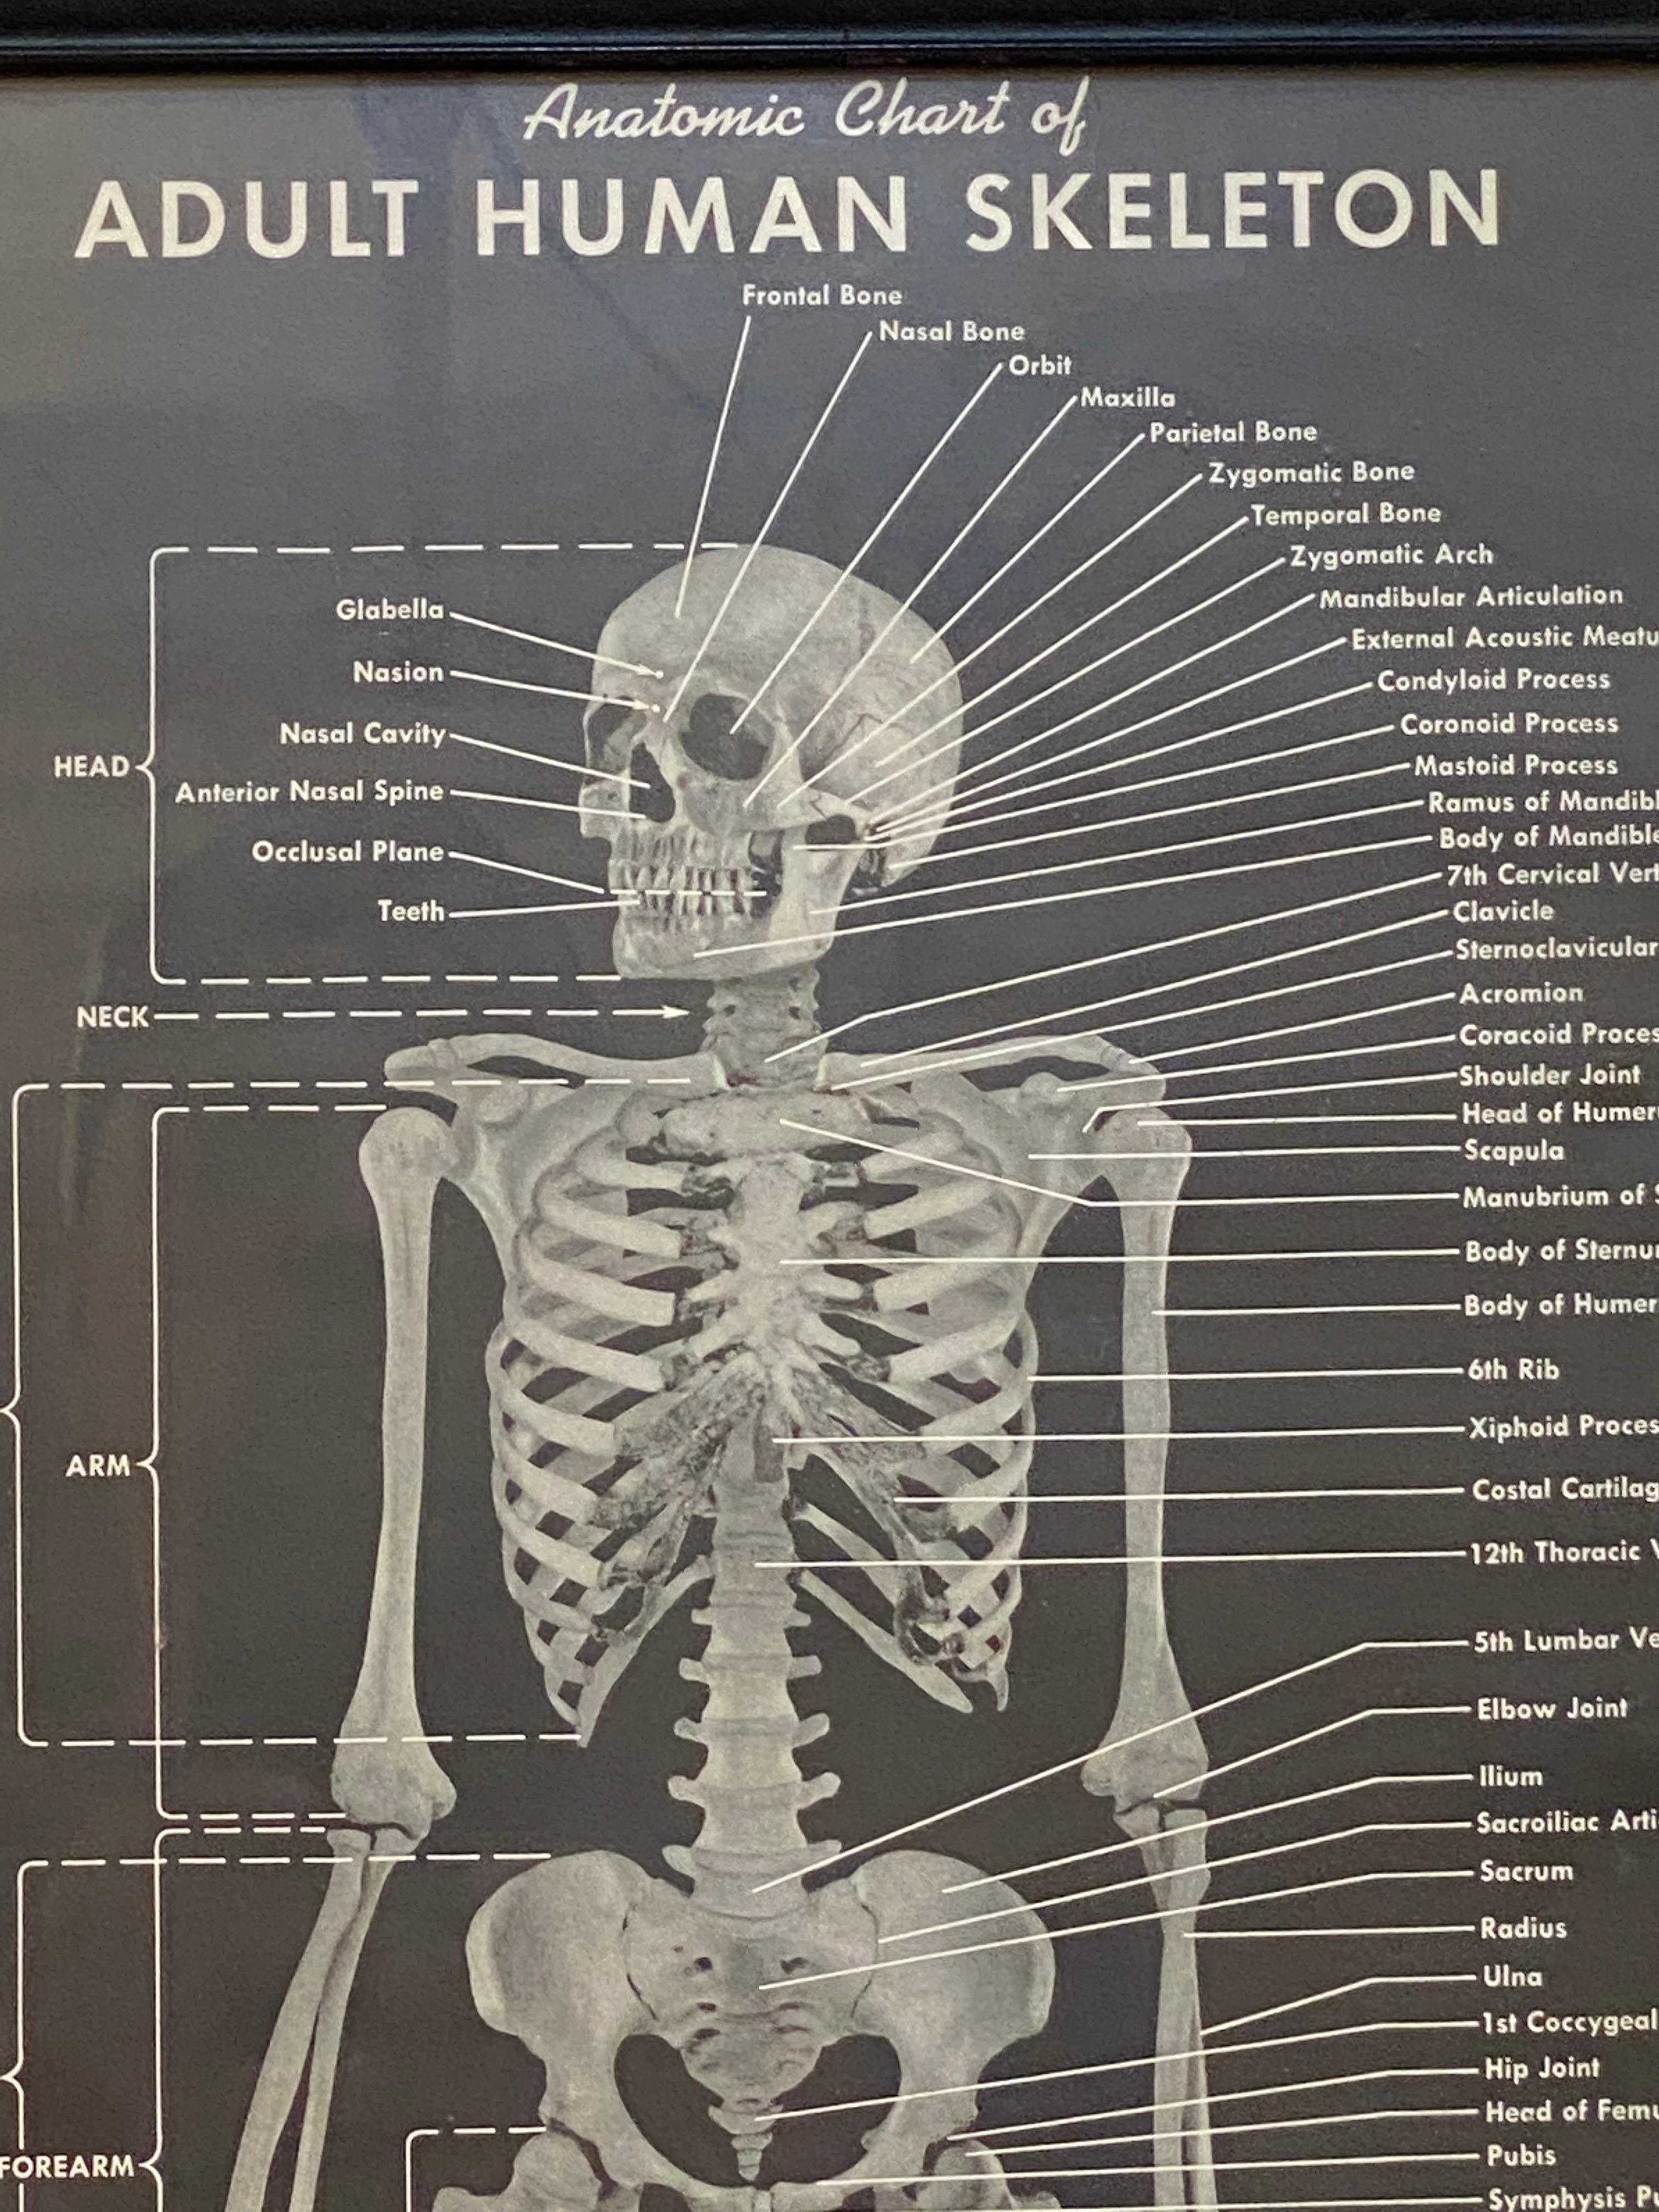 Schoolhouse 1940s Anatomic Chart of Adult Human Skeletal System